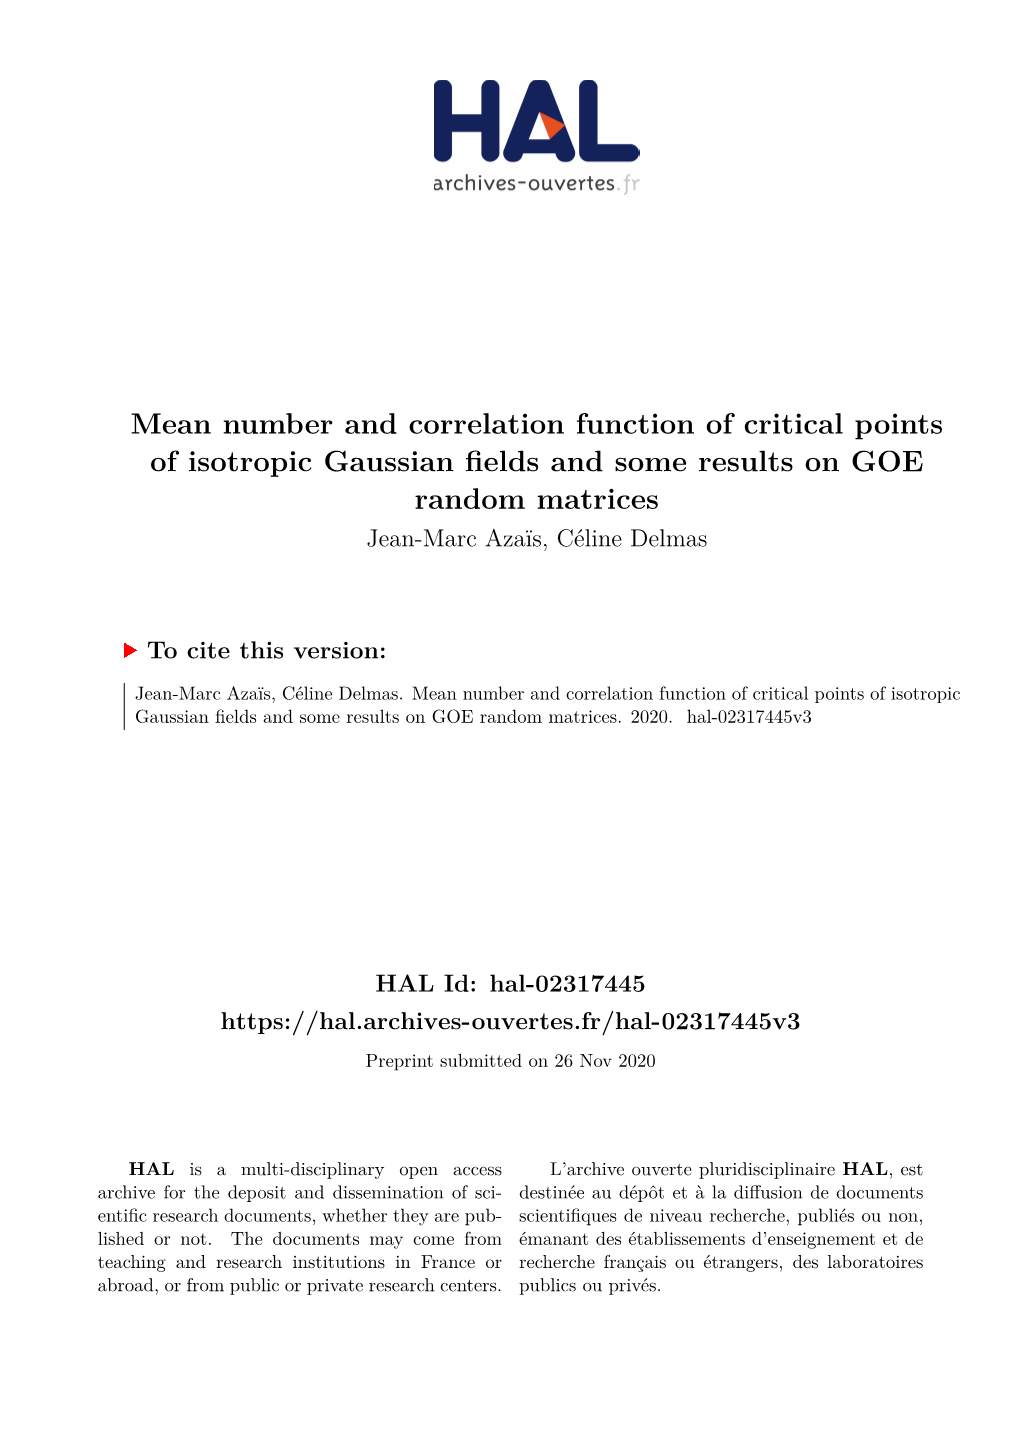 Mean Number and Correlation Function of Critical Points of Isotropic Gaussian Fields and Some Results on GOE Random Matrices Jean-Marc Azaïs, Céline Delmas